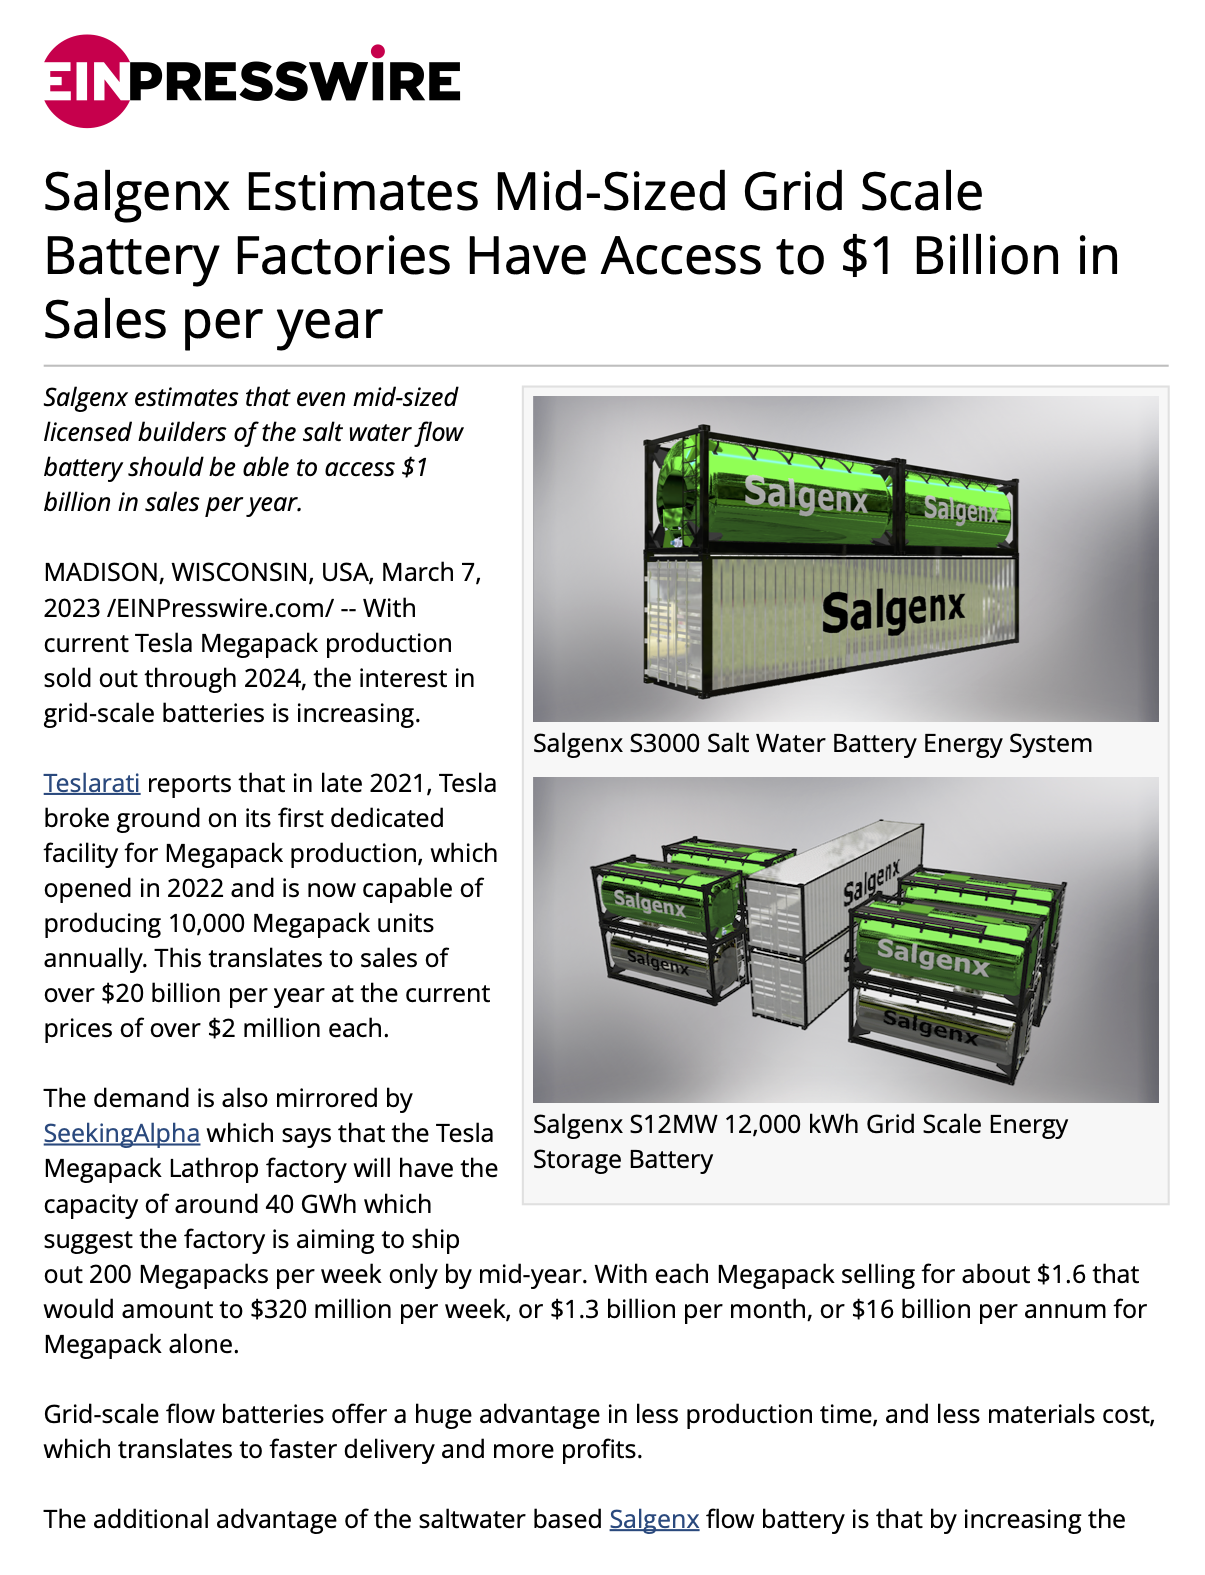 Salgenx Estimates Mid-Sized Grid Scale Battery Factories Have Access to $1 Billion in Sales per year